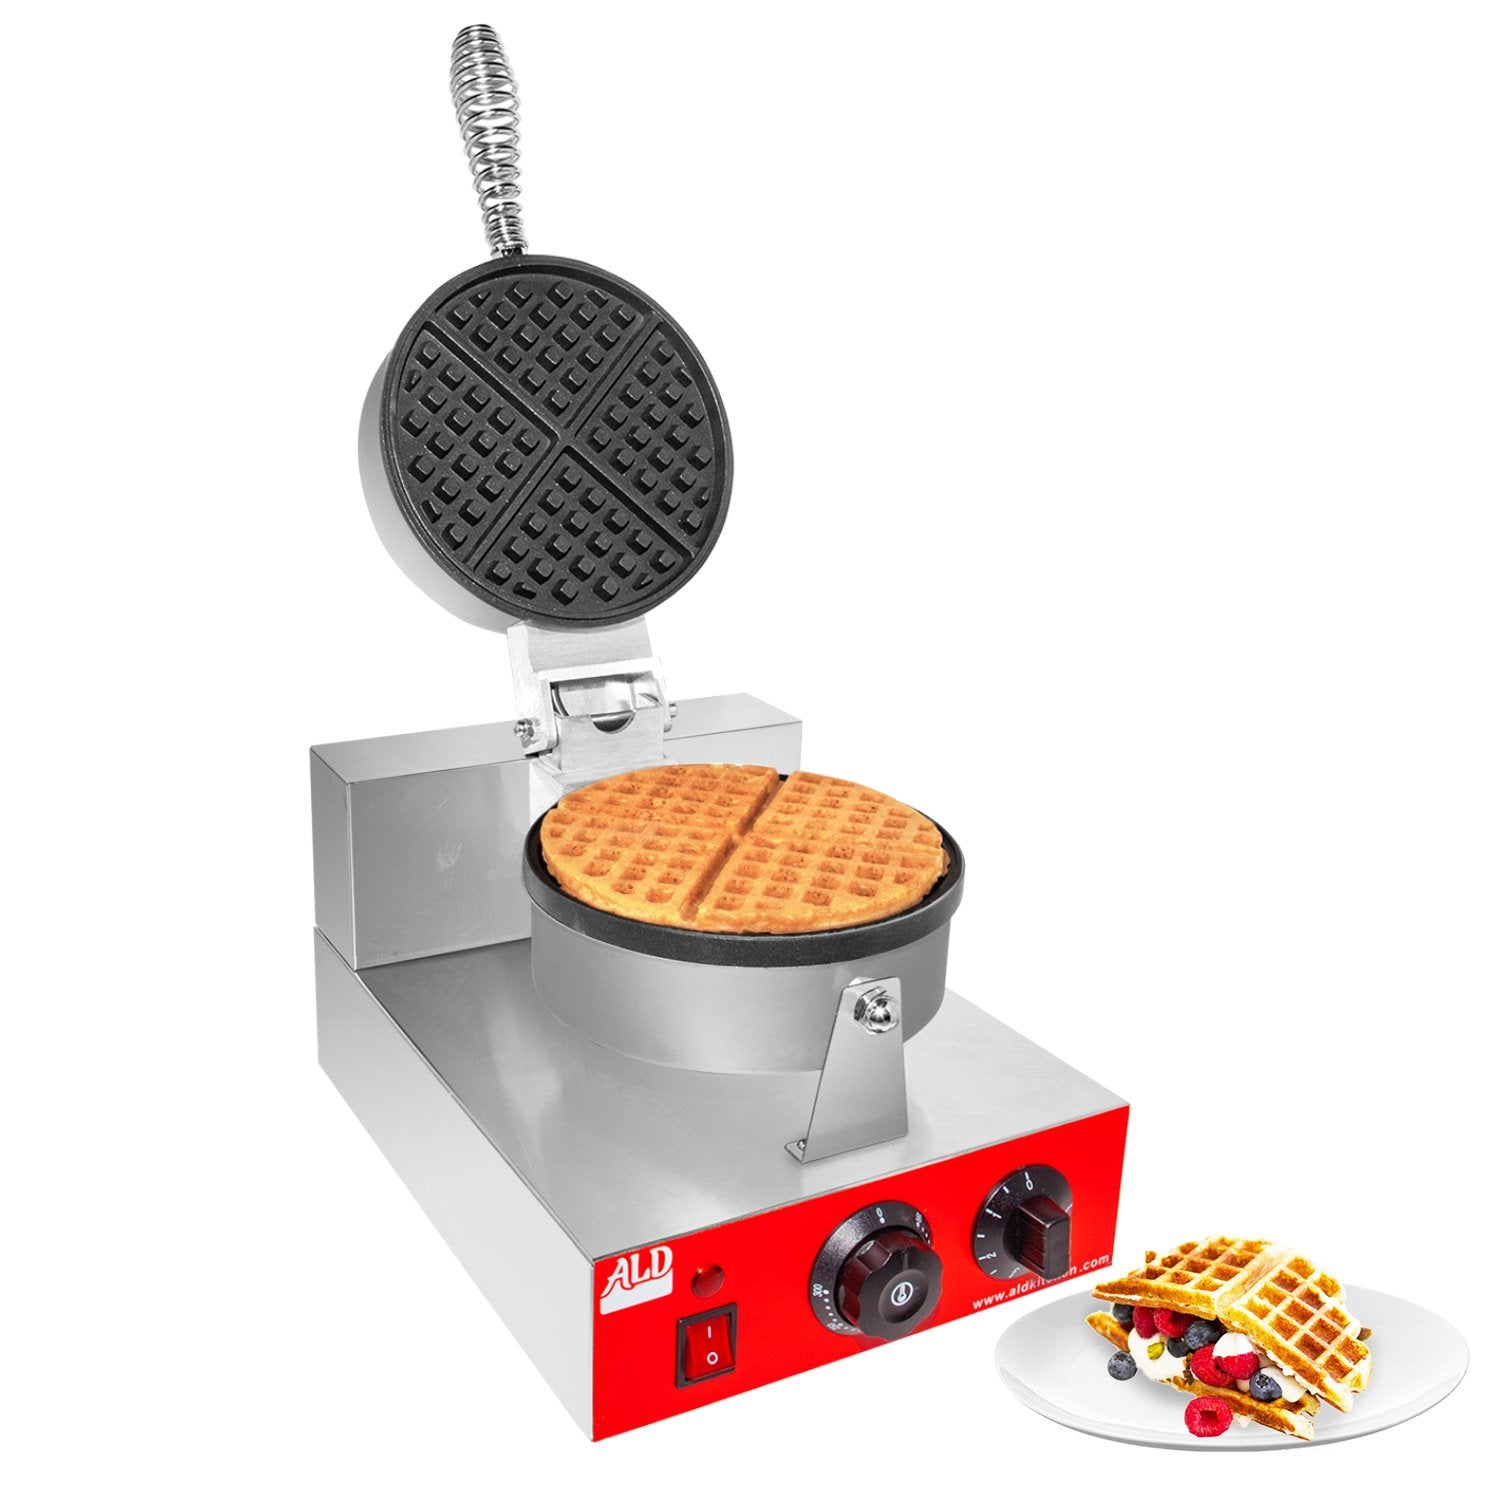 AR-HWB1 Belgian Waffle Maker | Waffle Iron with Red Panel | Nonstick